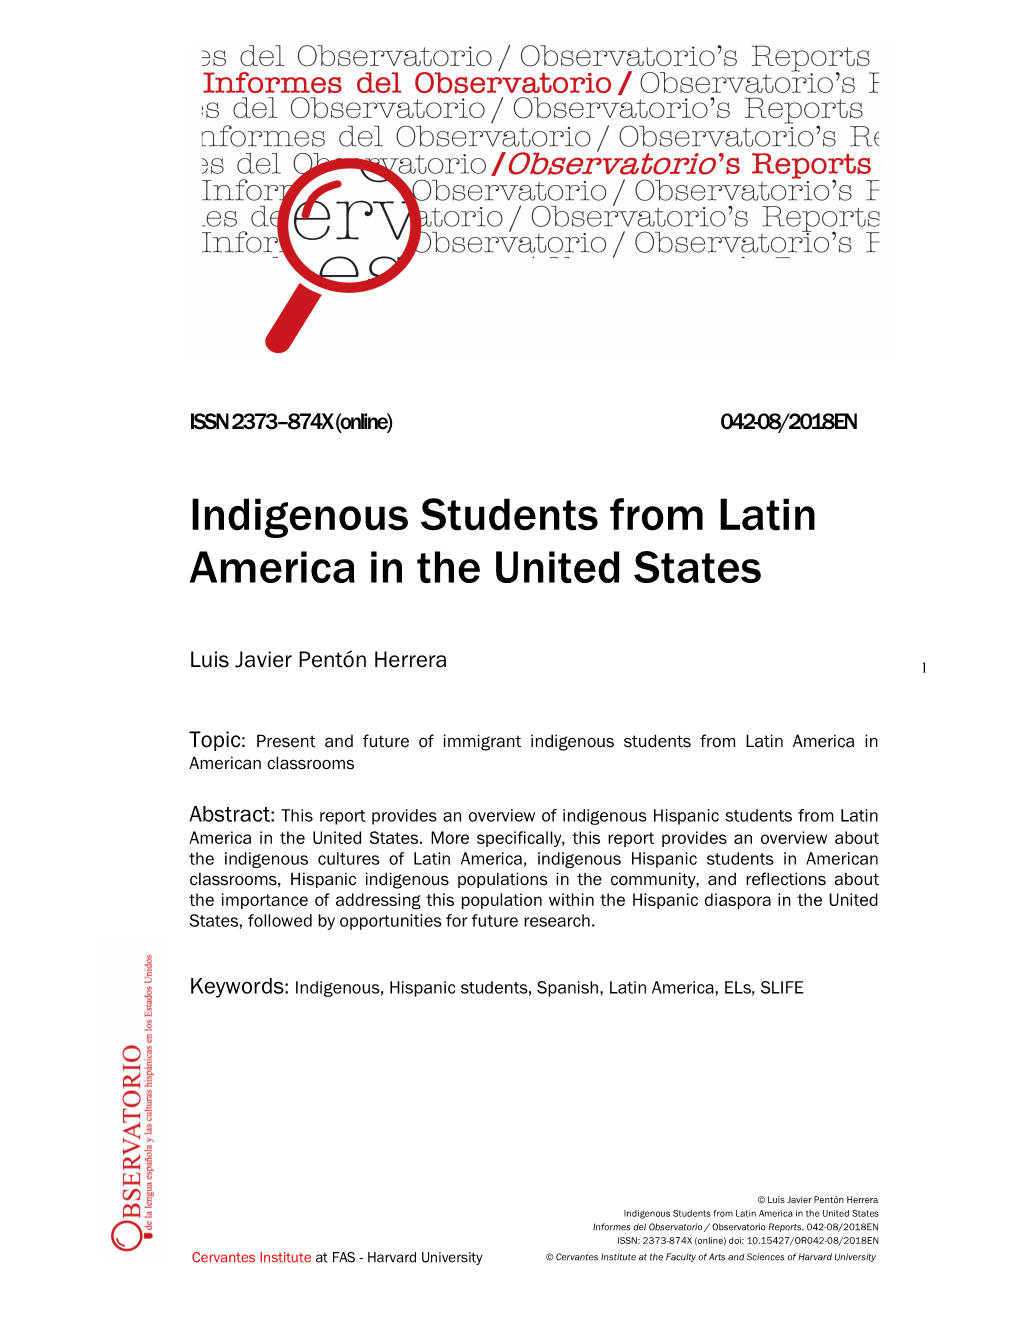 Indigenous Students from Latin America in the United States